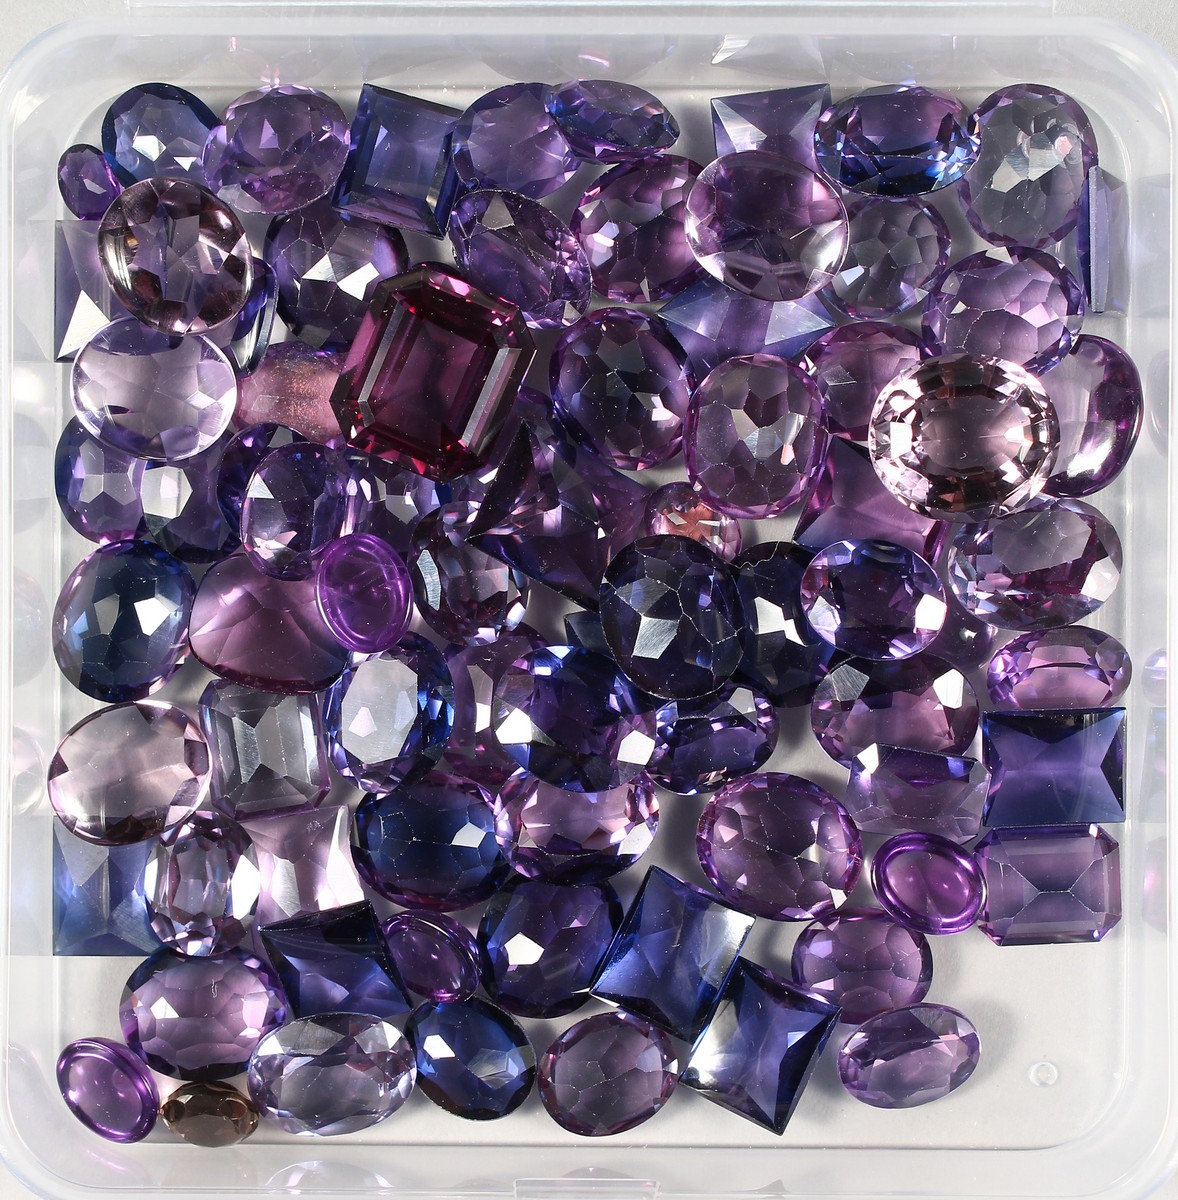 A BOX OF AMETHYST AND KUNSIT STONES